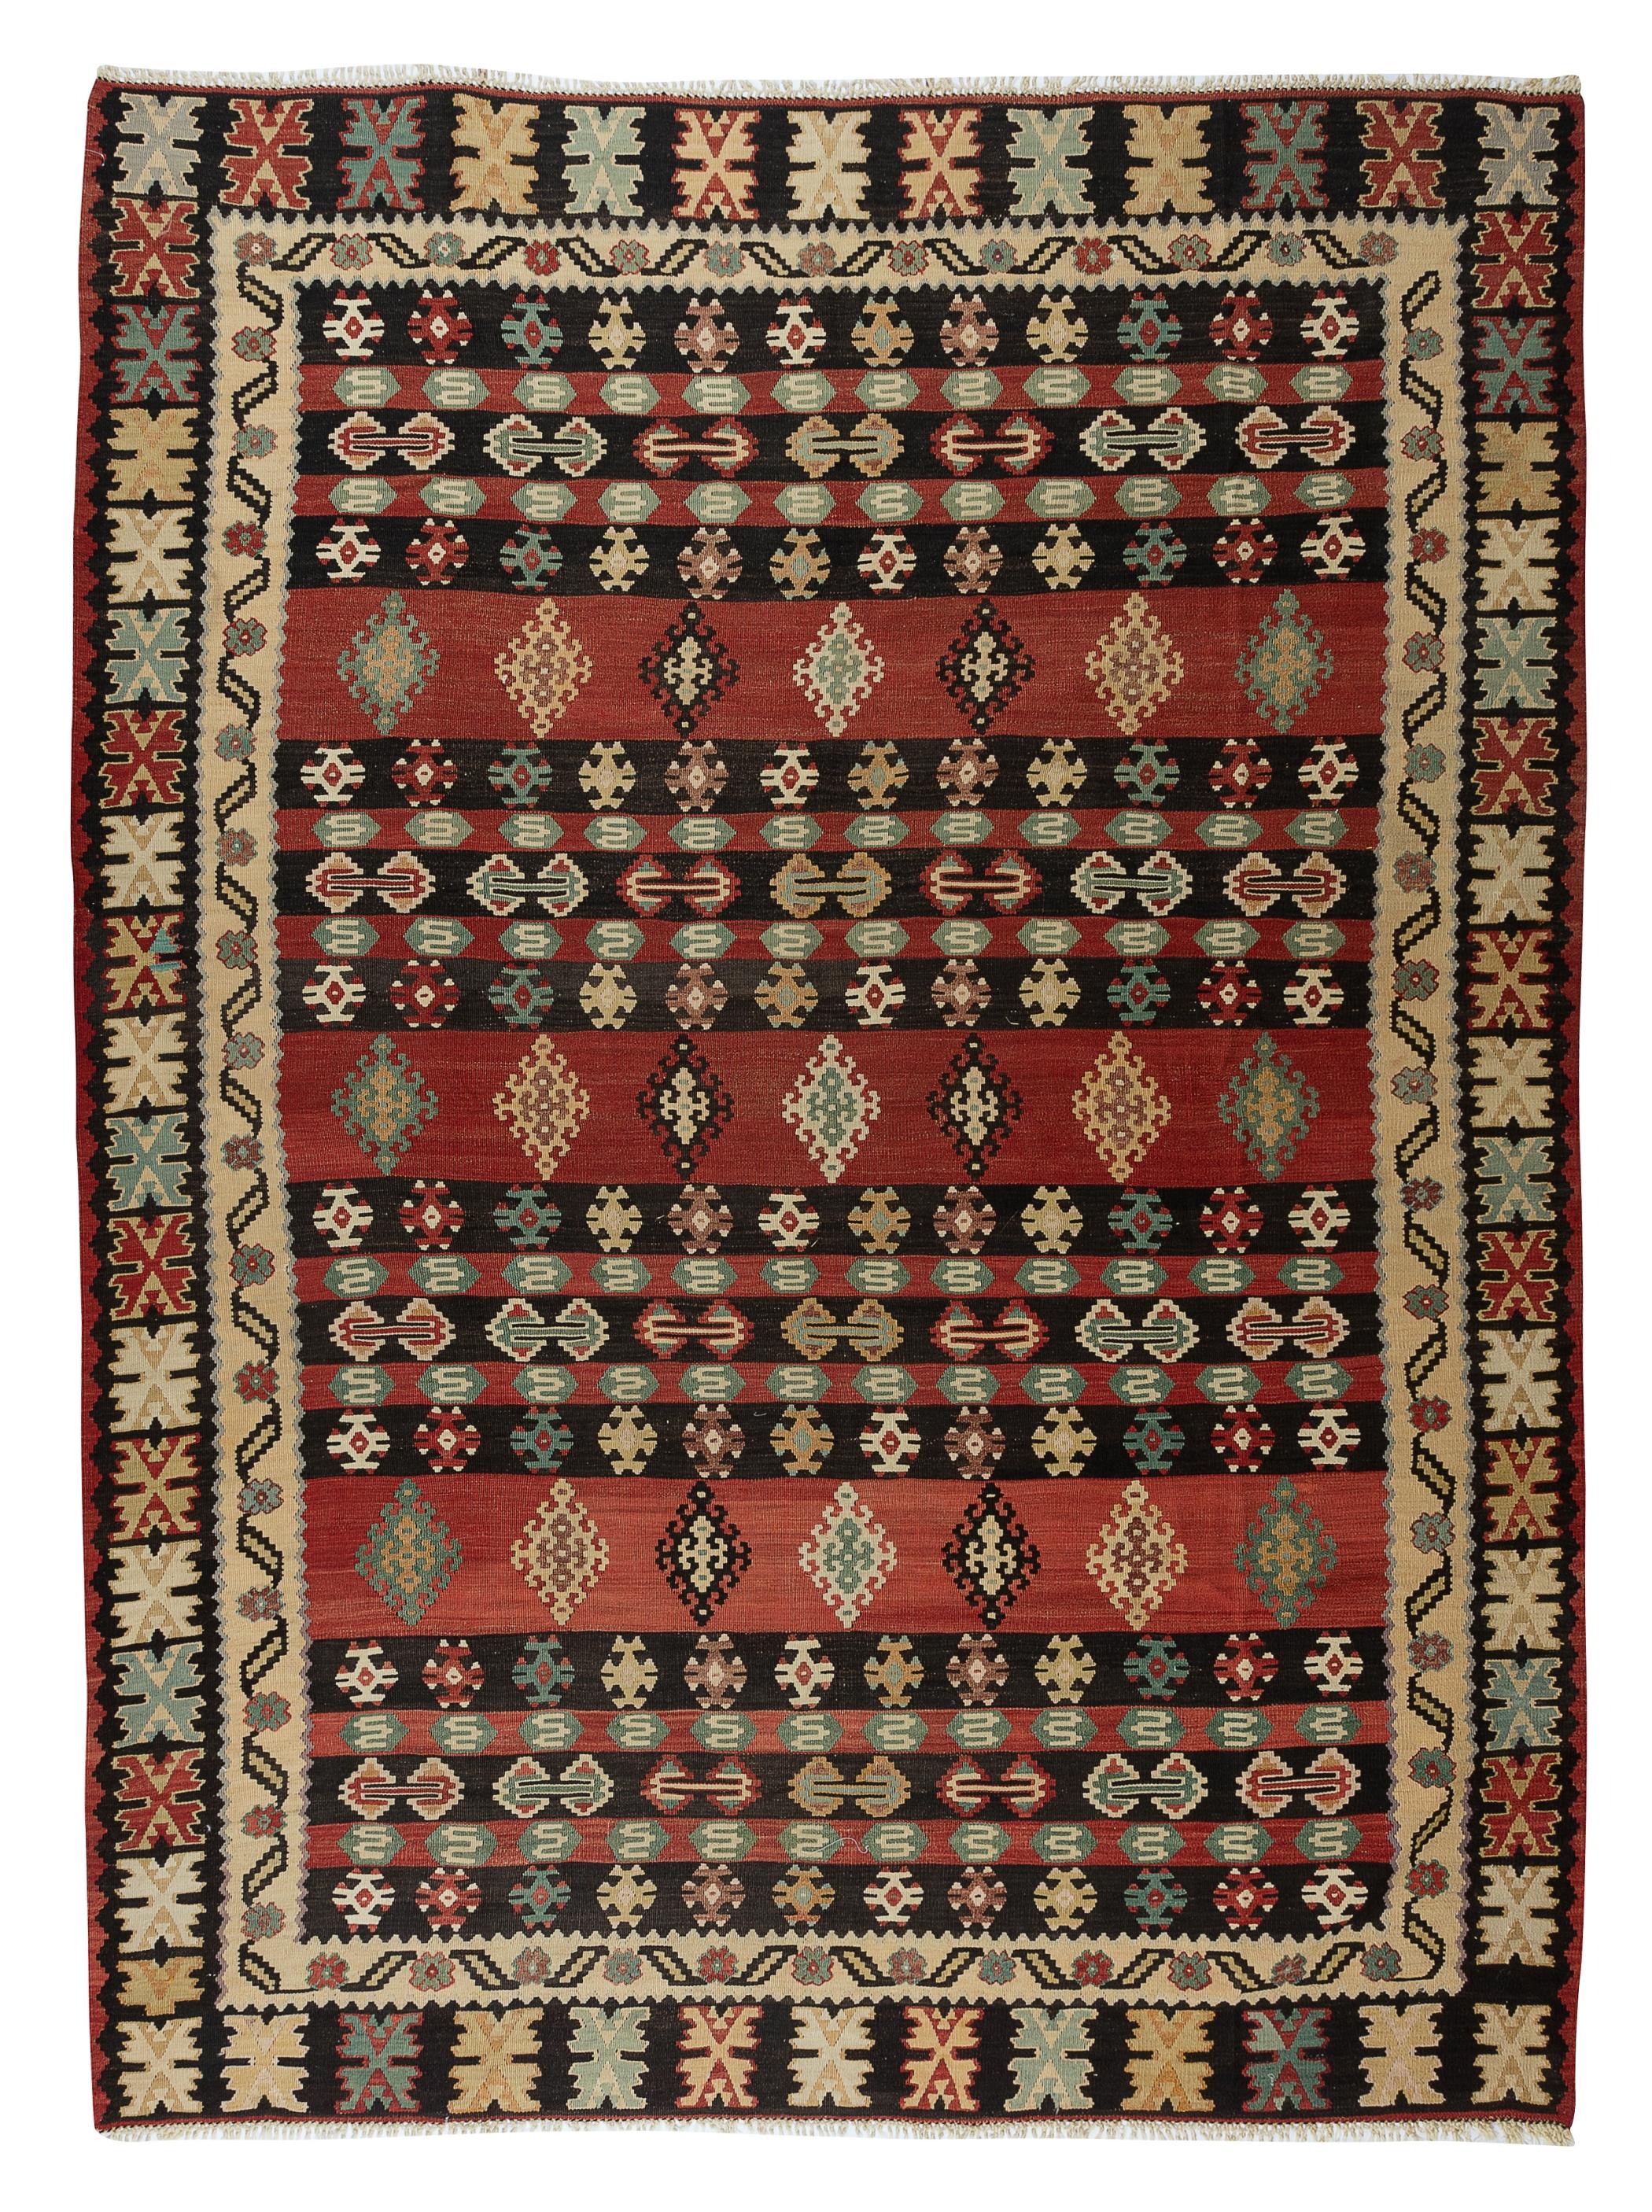 This authentic hand-woven rug made to be used by the villagers in Central Anatolia. 100% organic wool. Good condition and cleaned professionally.
Ideal for both residential and commercial interiors. Size: 7.6x10.3 ft.
We can supply a suitable